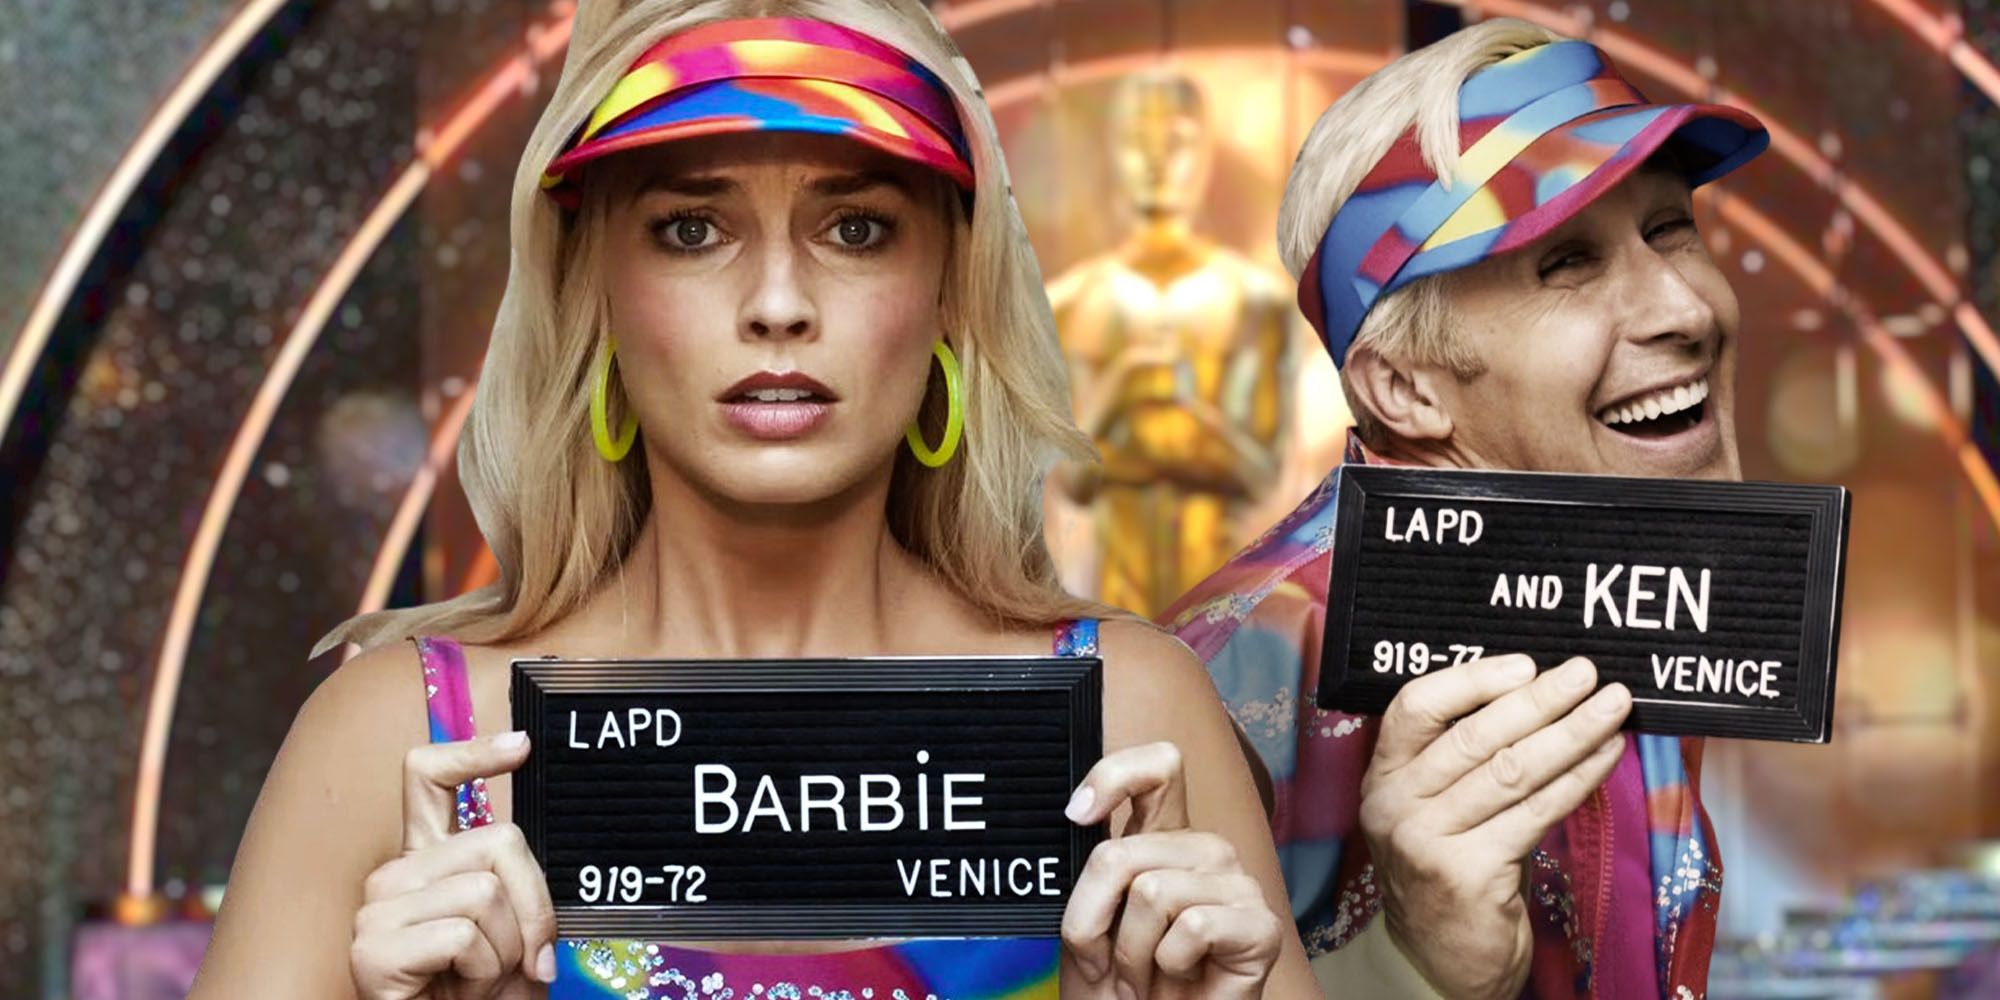 Barbie and Ken with their arrest photos at the Oscars